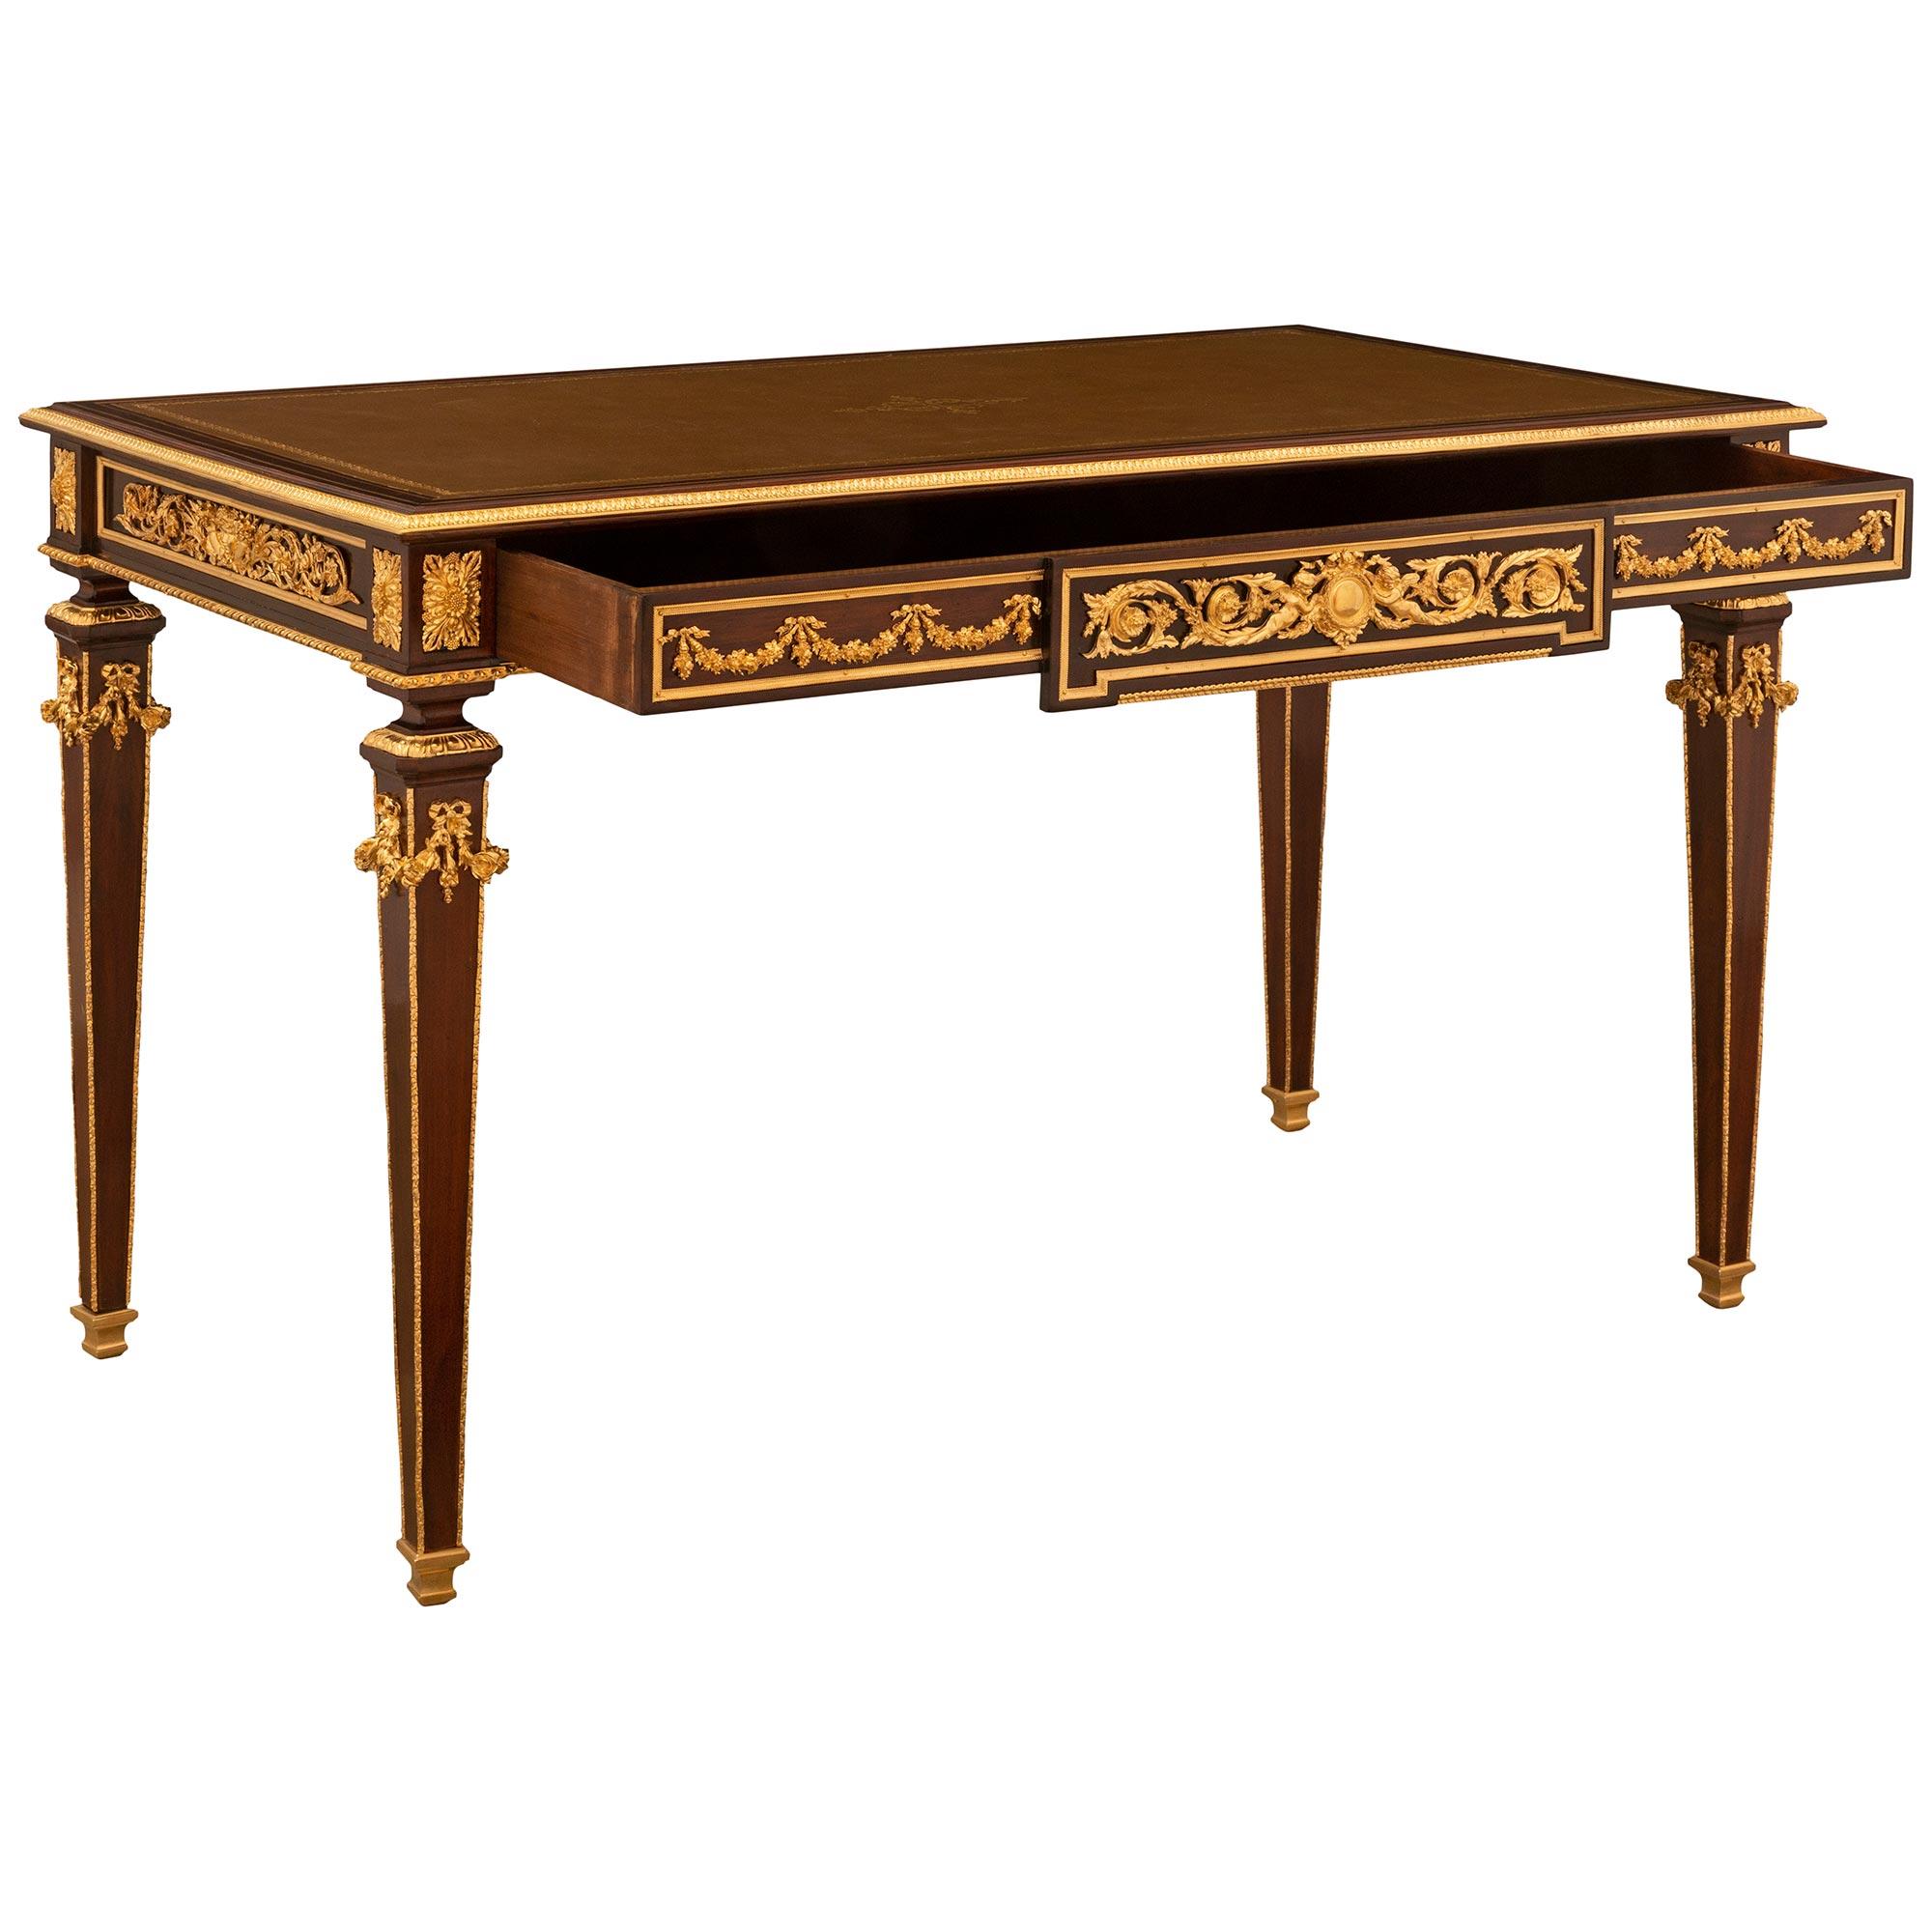 French 19th Century Belle Époque Period Mahogany, Brass and Ormolu Desk In Good Condition For Sale In West Palm Beach, FL